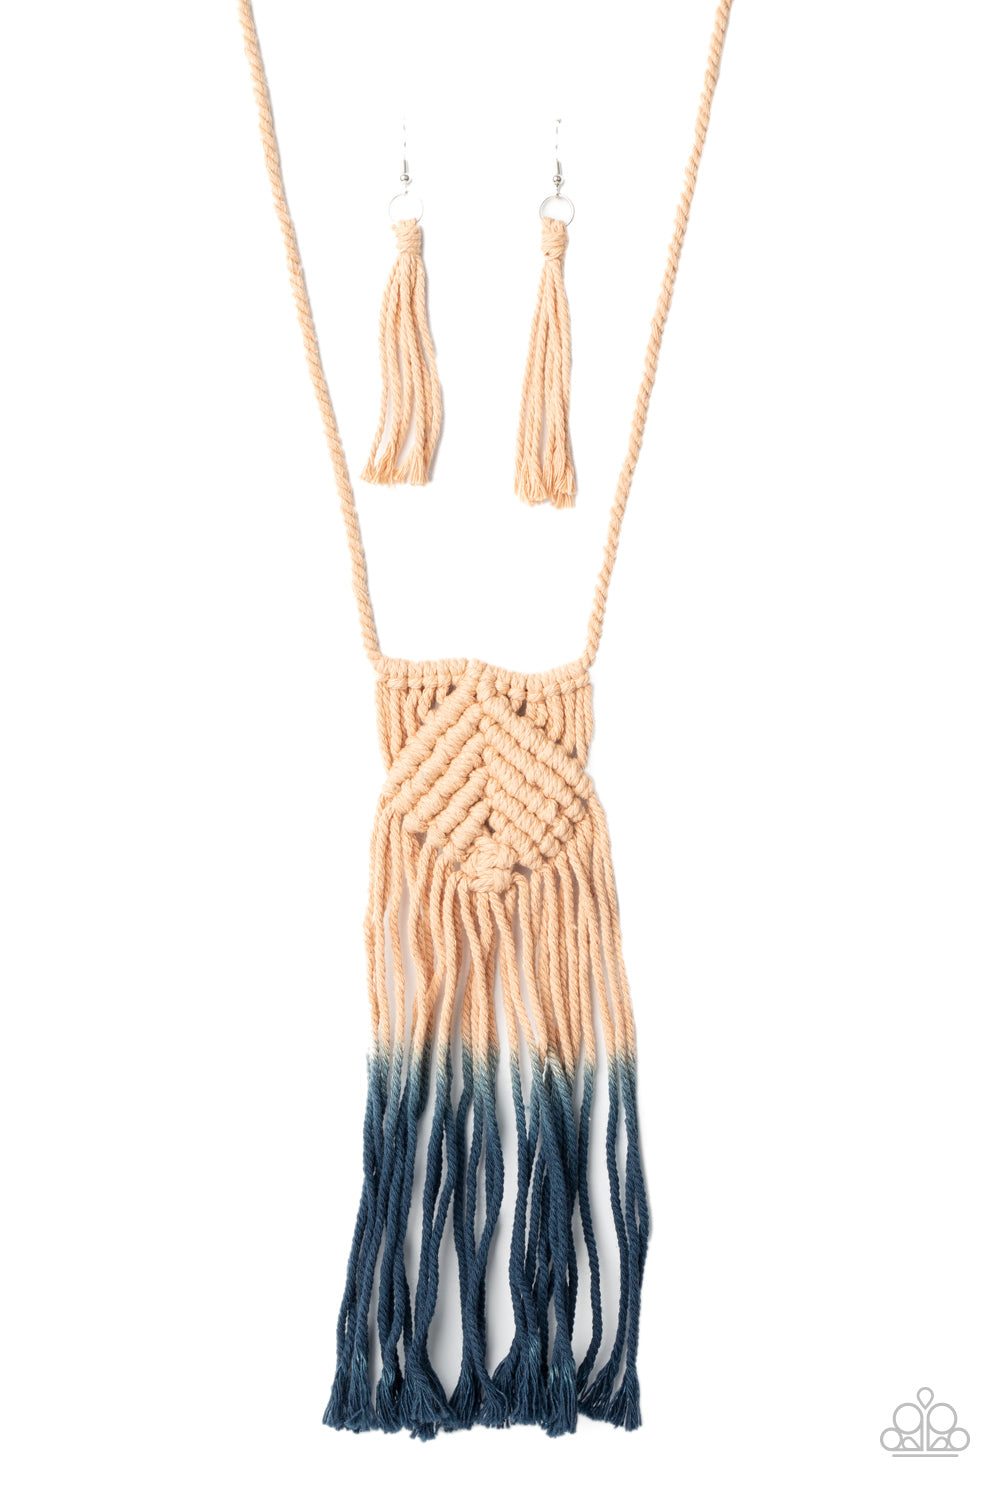 Look At MACRAME Now - Blue/Tan necklace